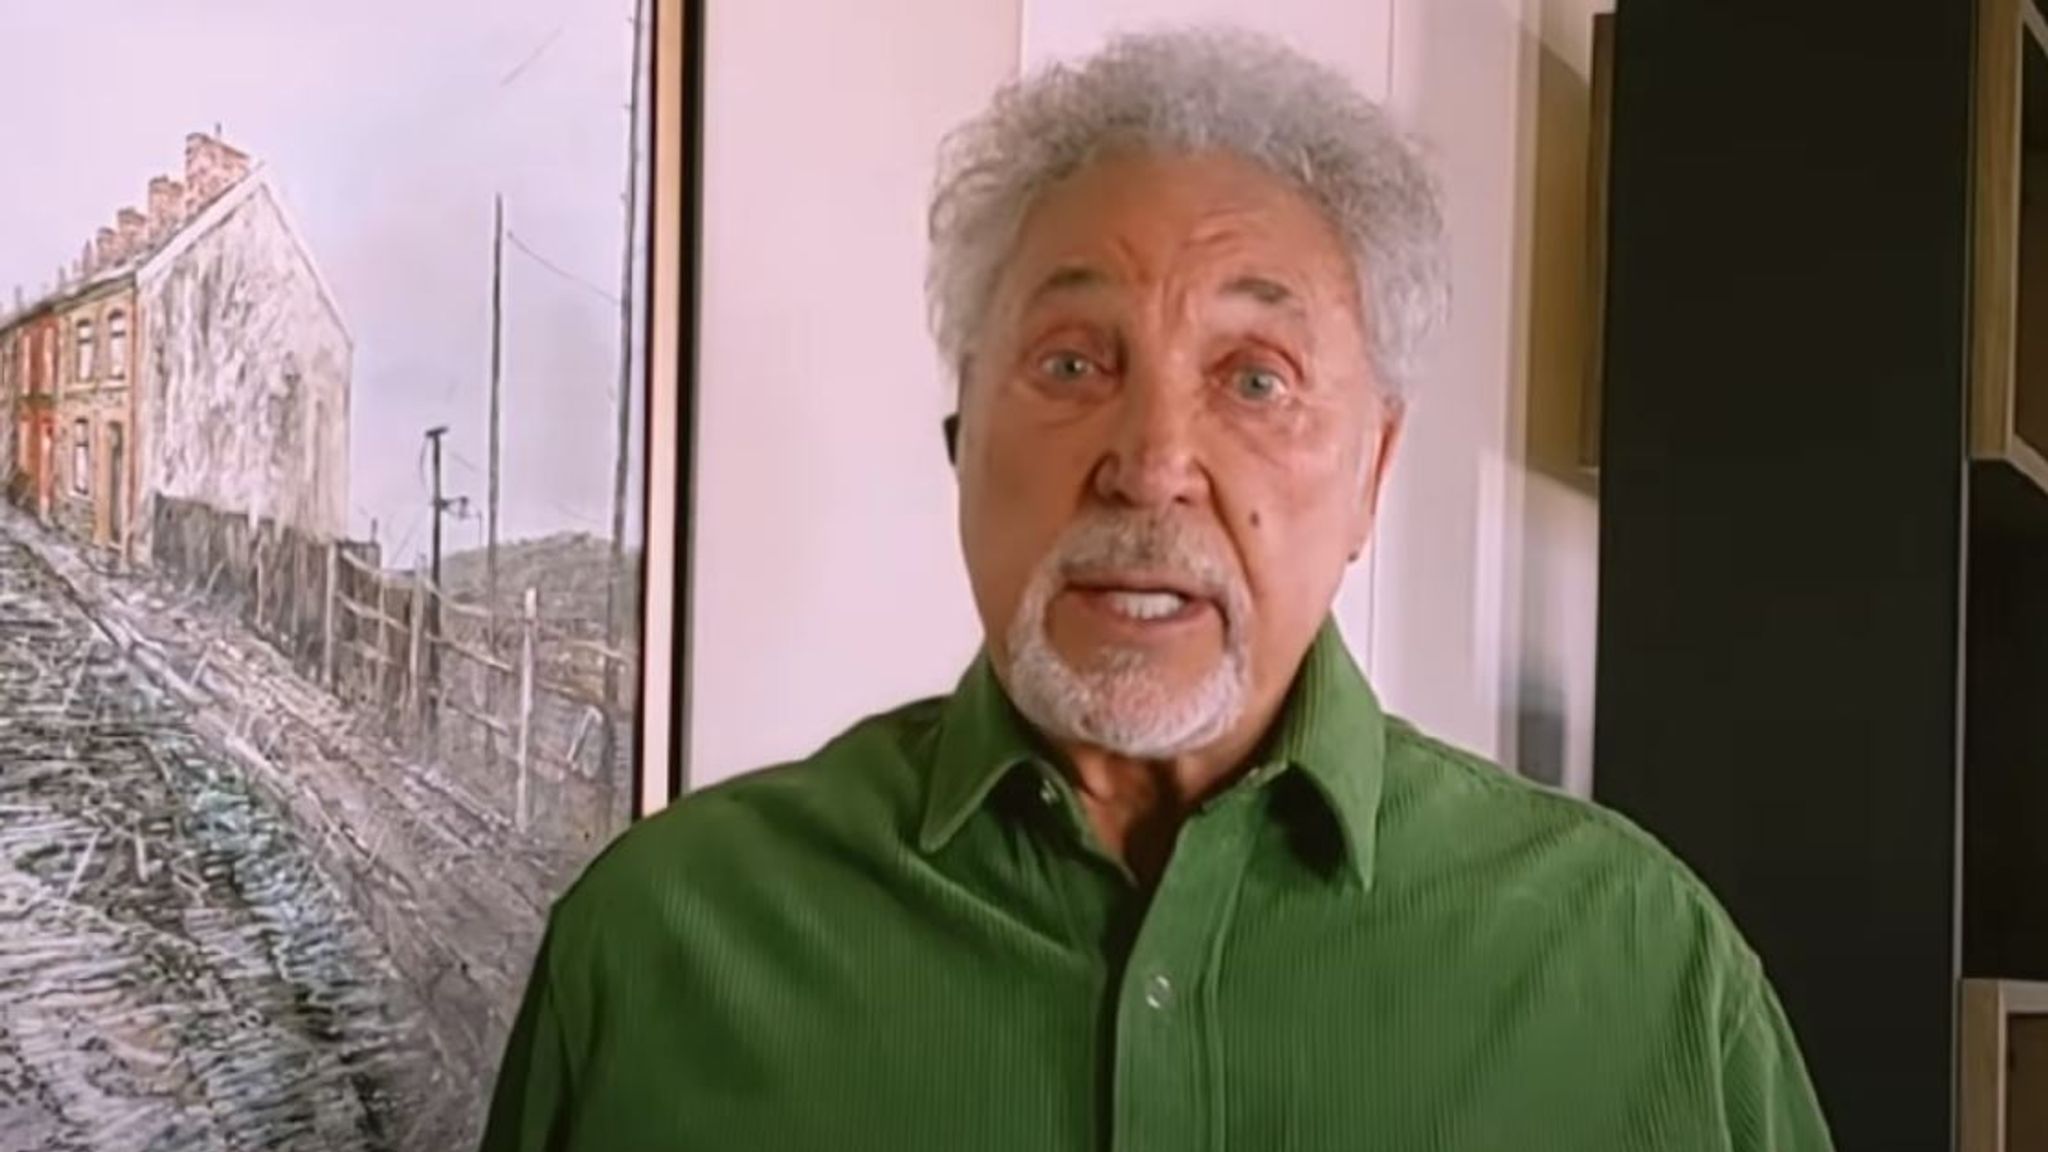 Coronavirus Tom Jones Opens Up About Being Quarantined With Tb For Two Years As A Child Ents Arts News Sky News